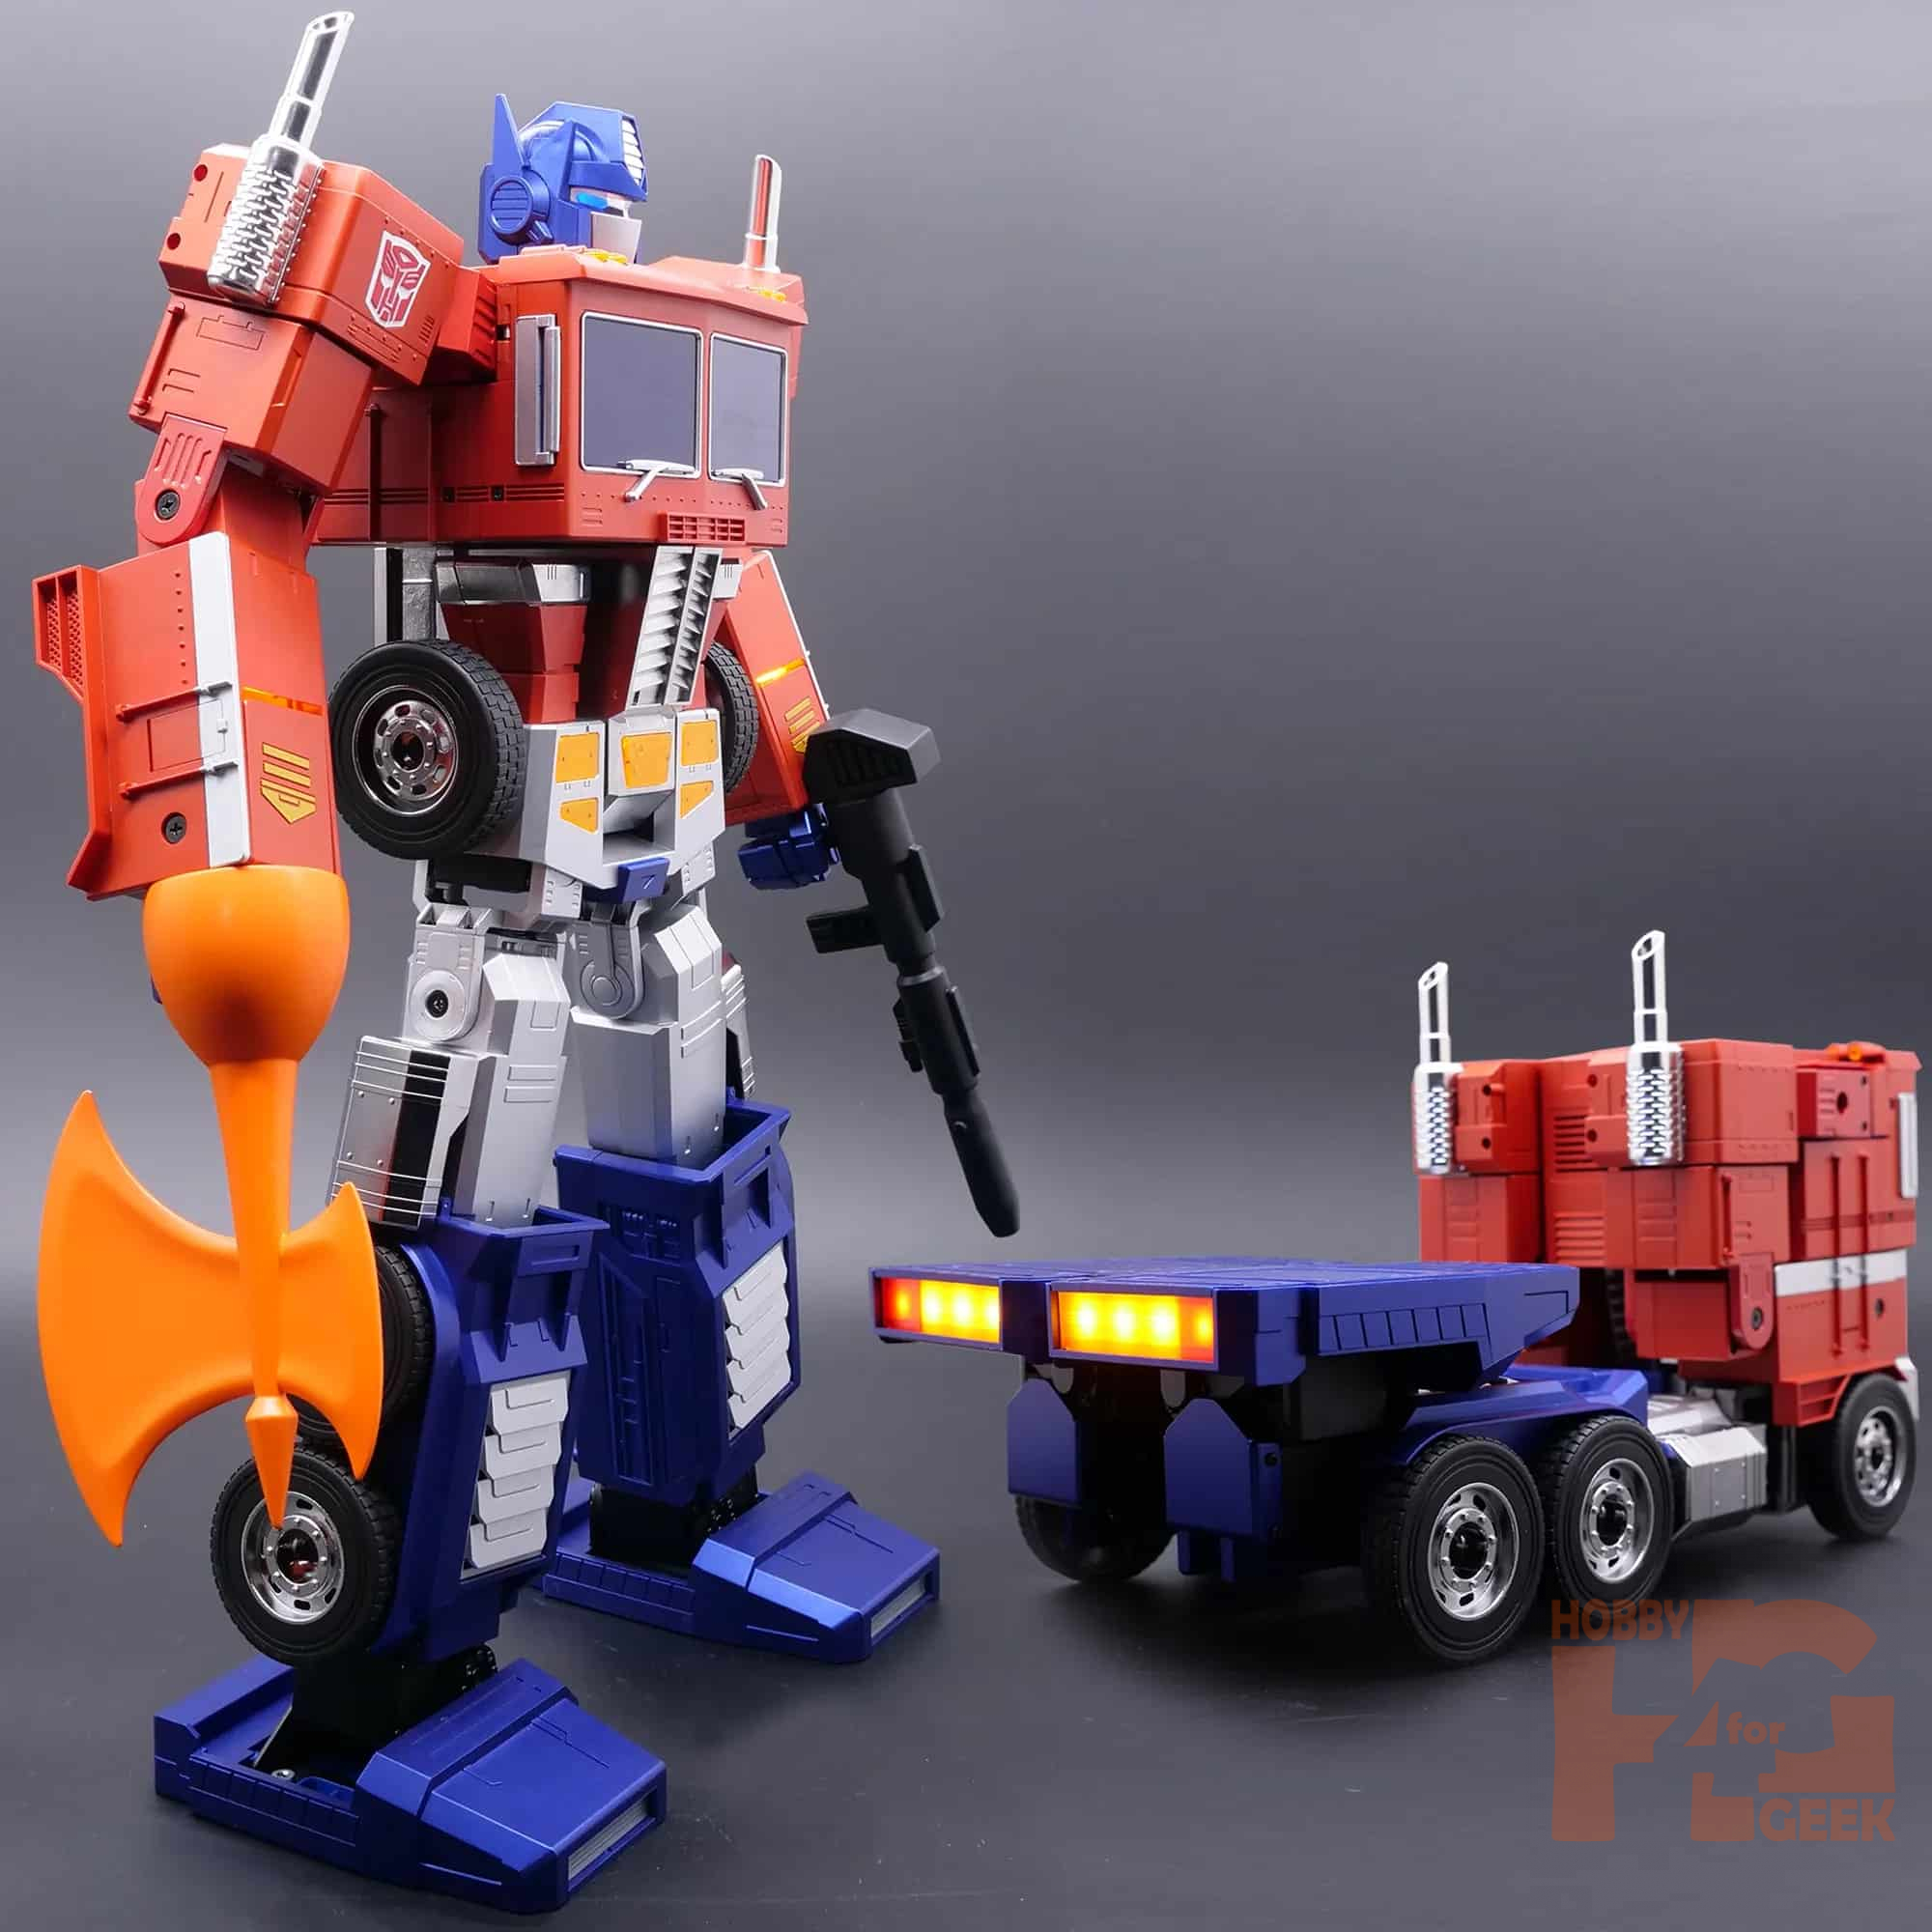 Jada Toys Brings Optimus Prime to Life with the Launch of the